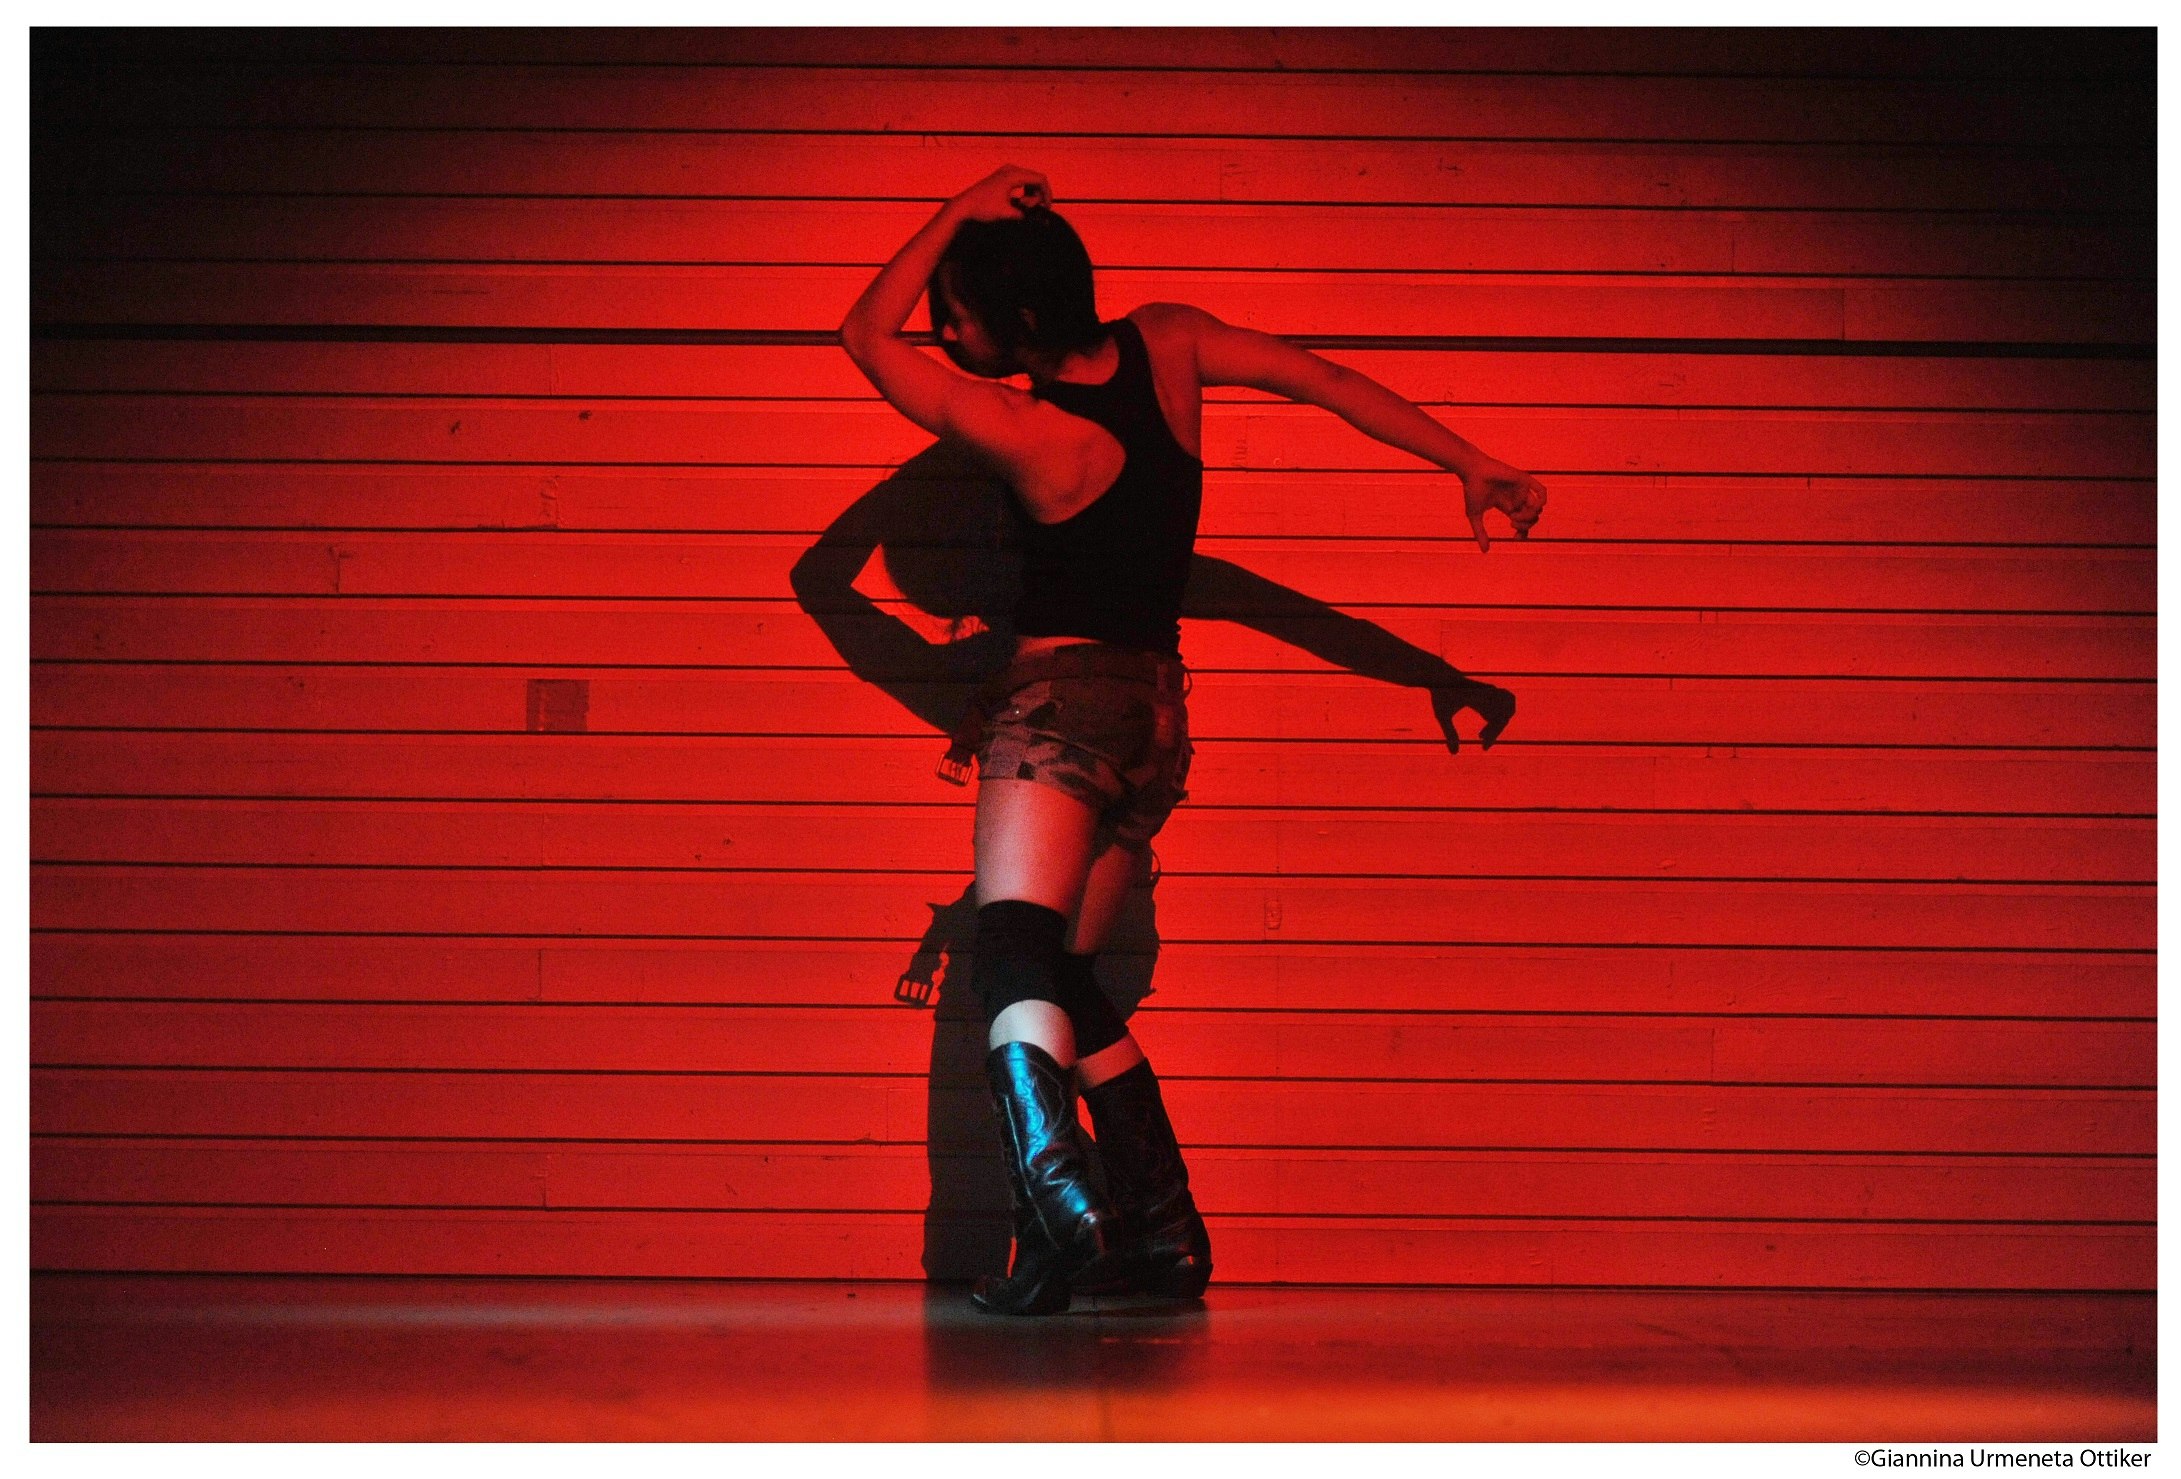 A dancer has their back to us, posing in a red spotlight.